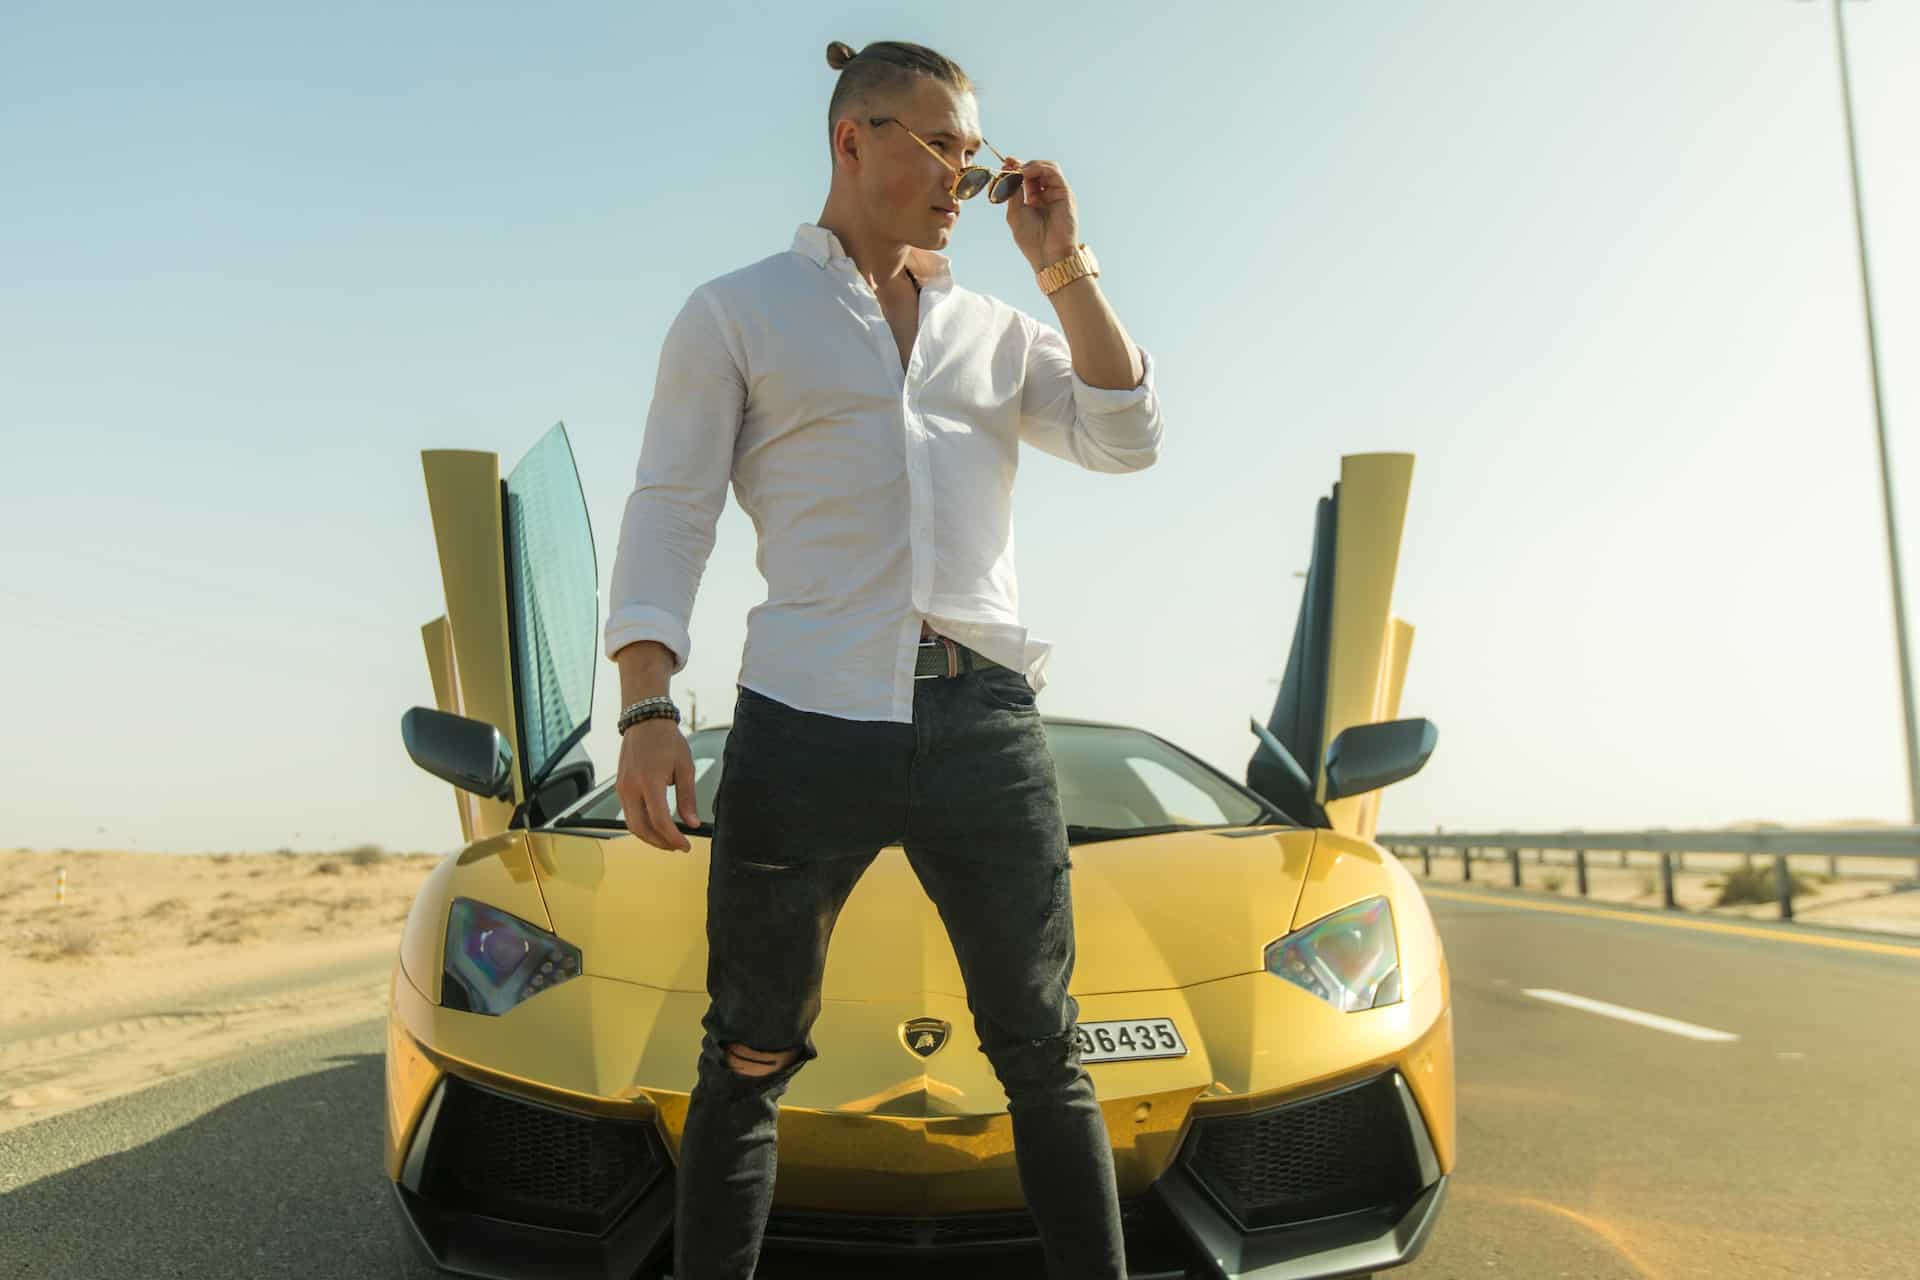 owning an exotic car as a hobby for men